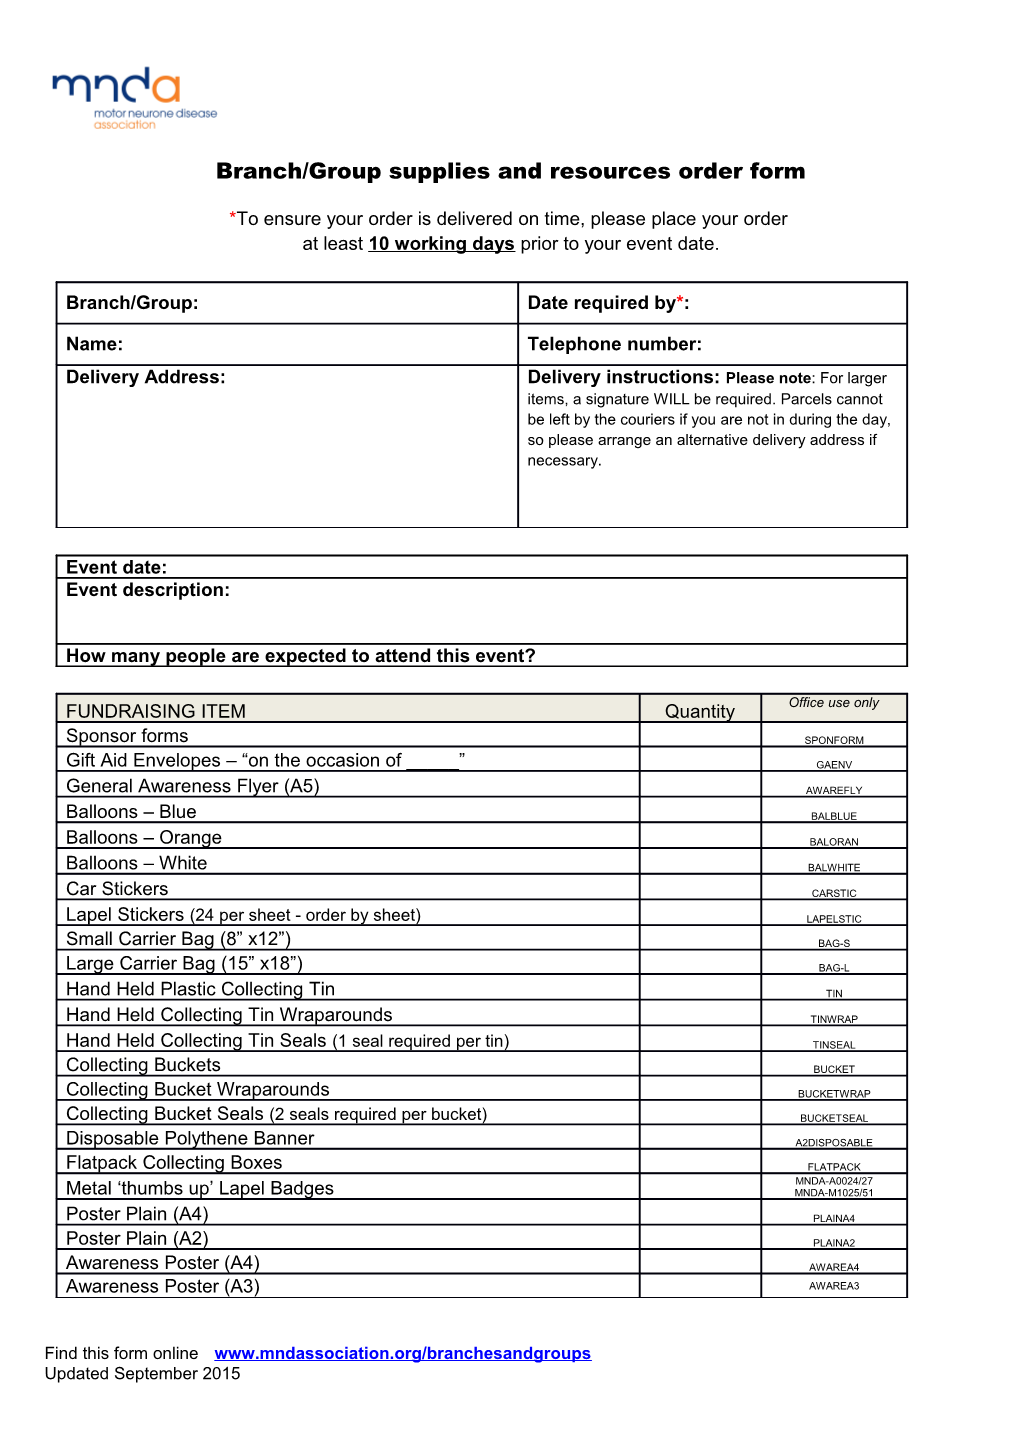 Branch/Group Supplies and Resources Order Form